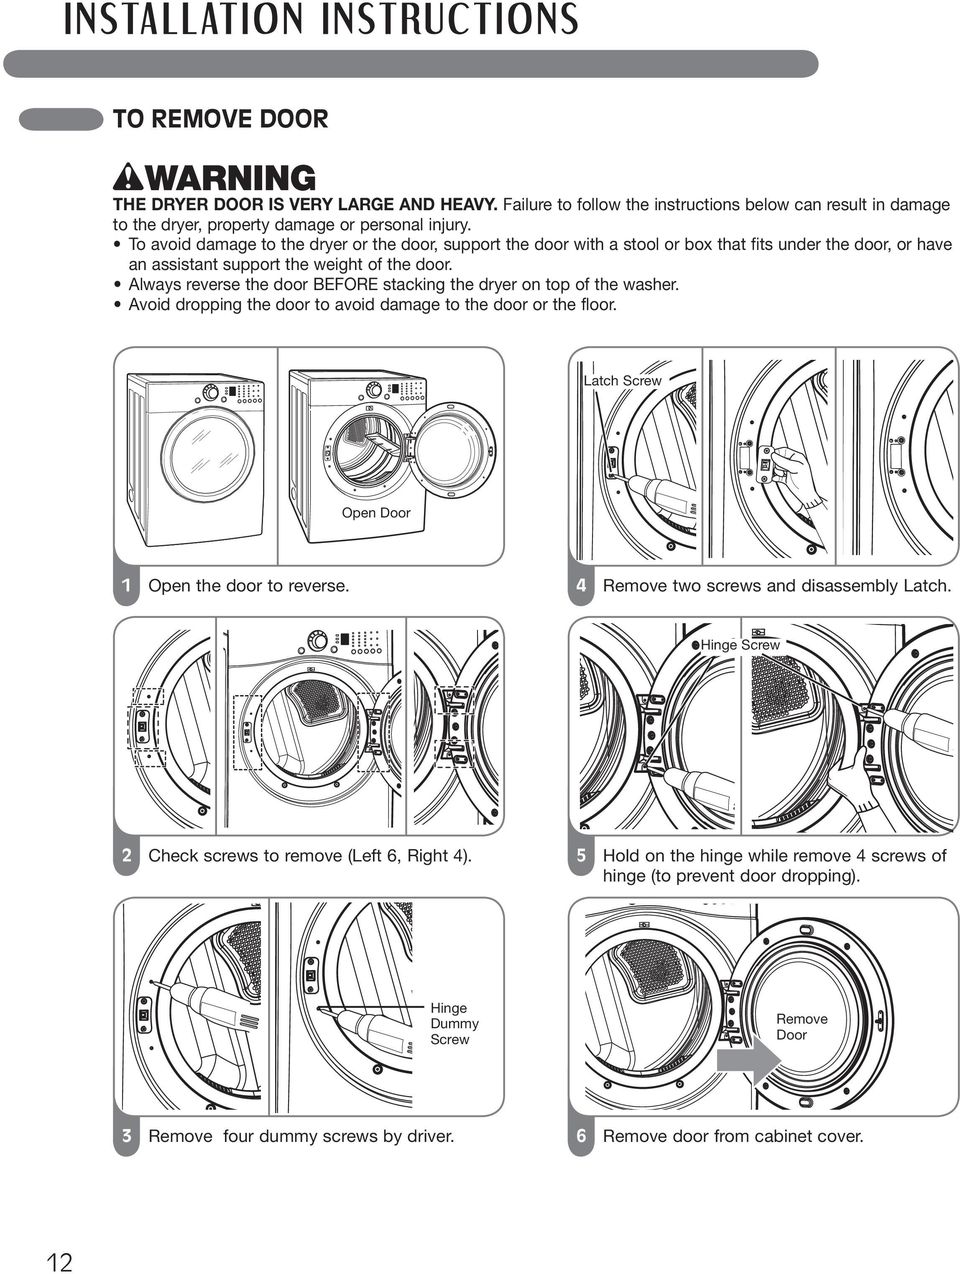 Always reverse the door BEFORE stacking the dryer on top of the washer. Avoid dropping the door to avoid damage to the door or the floor.